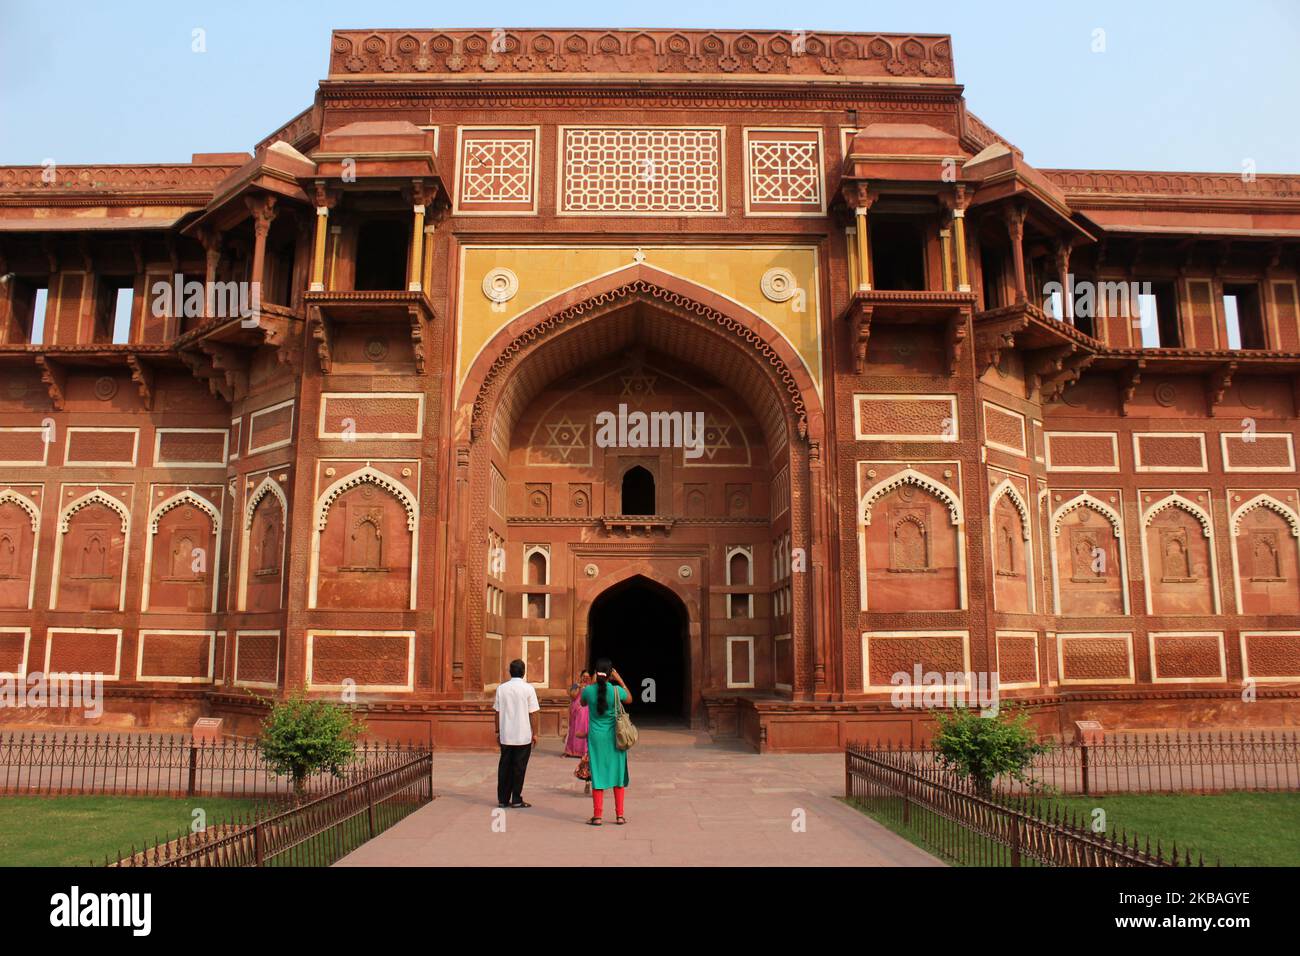 Tourists visit the Agra fort at Rakabganj area in Agra, Uttar Pradesh, India on November 08, 2019. It was the main residence of the emperors of the Mughal Dynasty until 1638, when the capital was shifted from Agra to Delhi. (Photo by Mayank Makhija/NurPhoto) Stock Photo